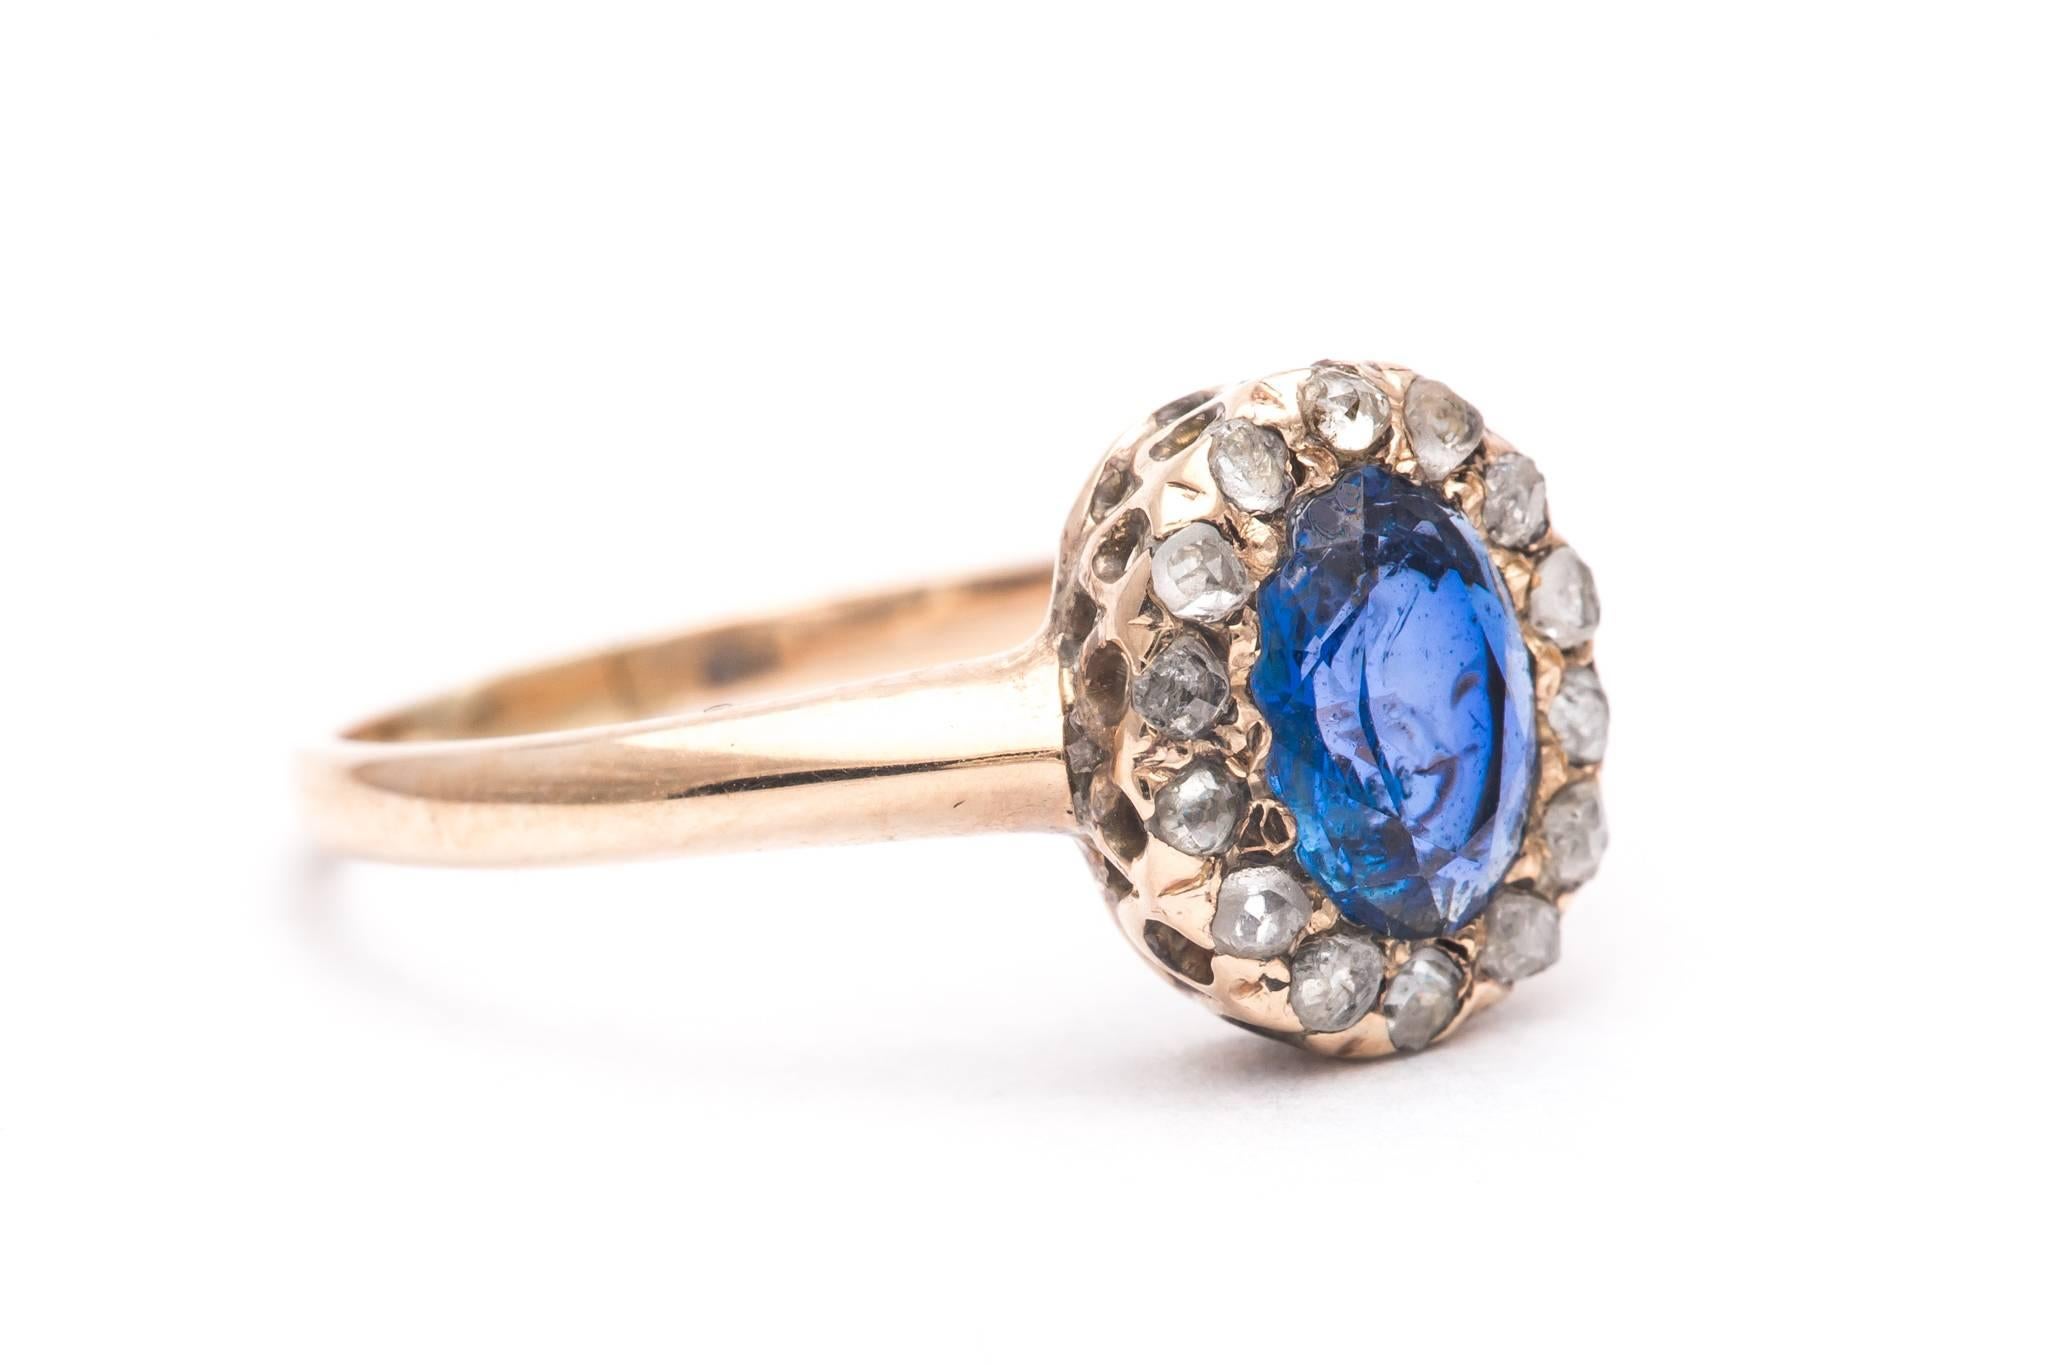 A beautiful original early victorian period sapphire, and diamond ring in yellow gold.  Centered by a 1.14 carat antique oval cut sapphire, this ring features a halo of early rose cut diamonds surrounding the center sapphire.

Of beautiful rich